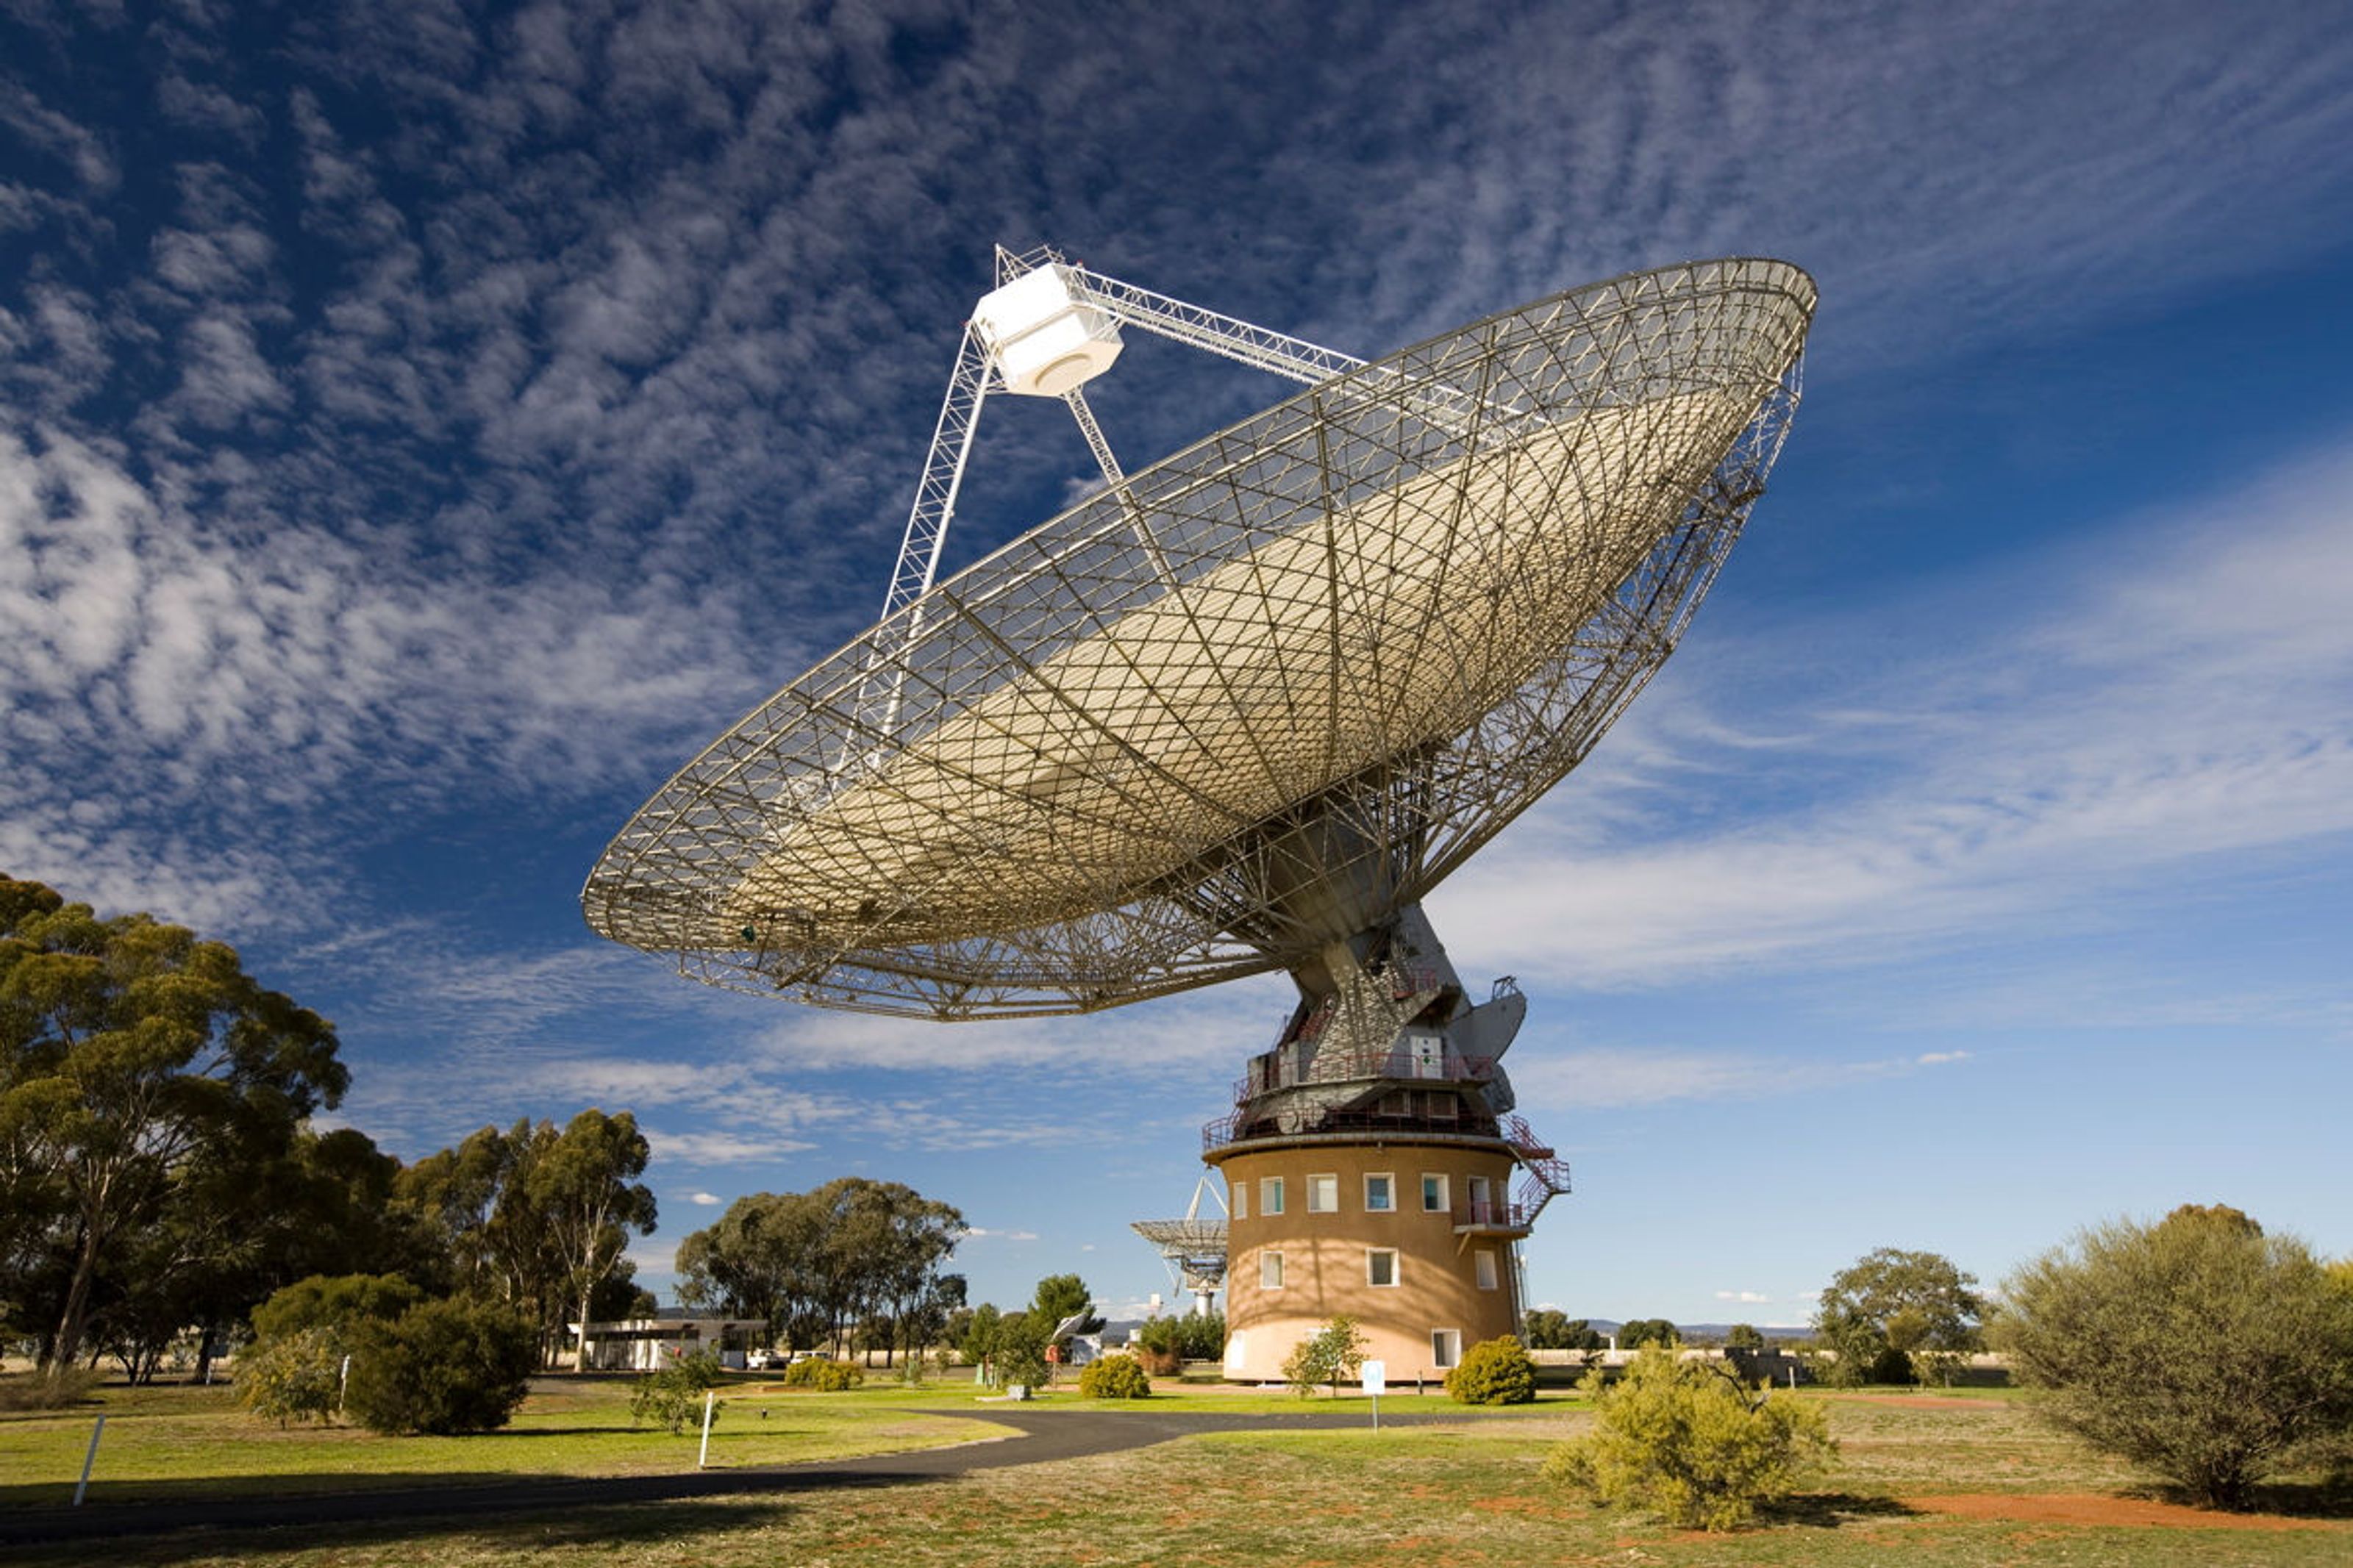 The Parkes radiotelescope in rural New South Wales